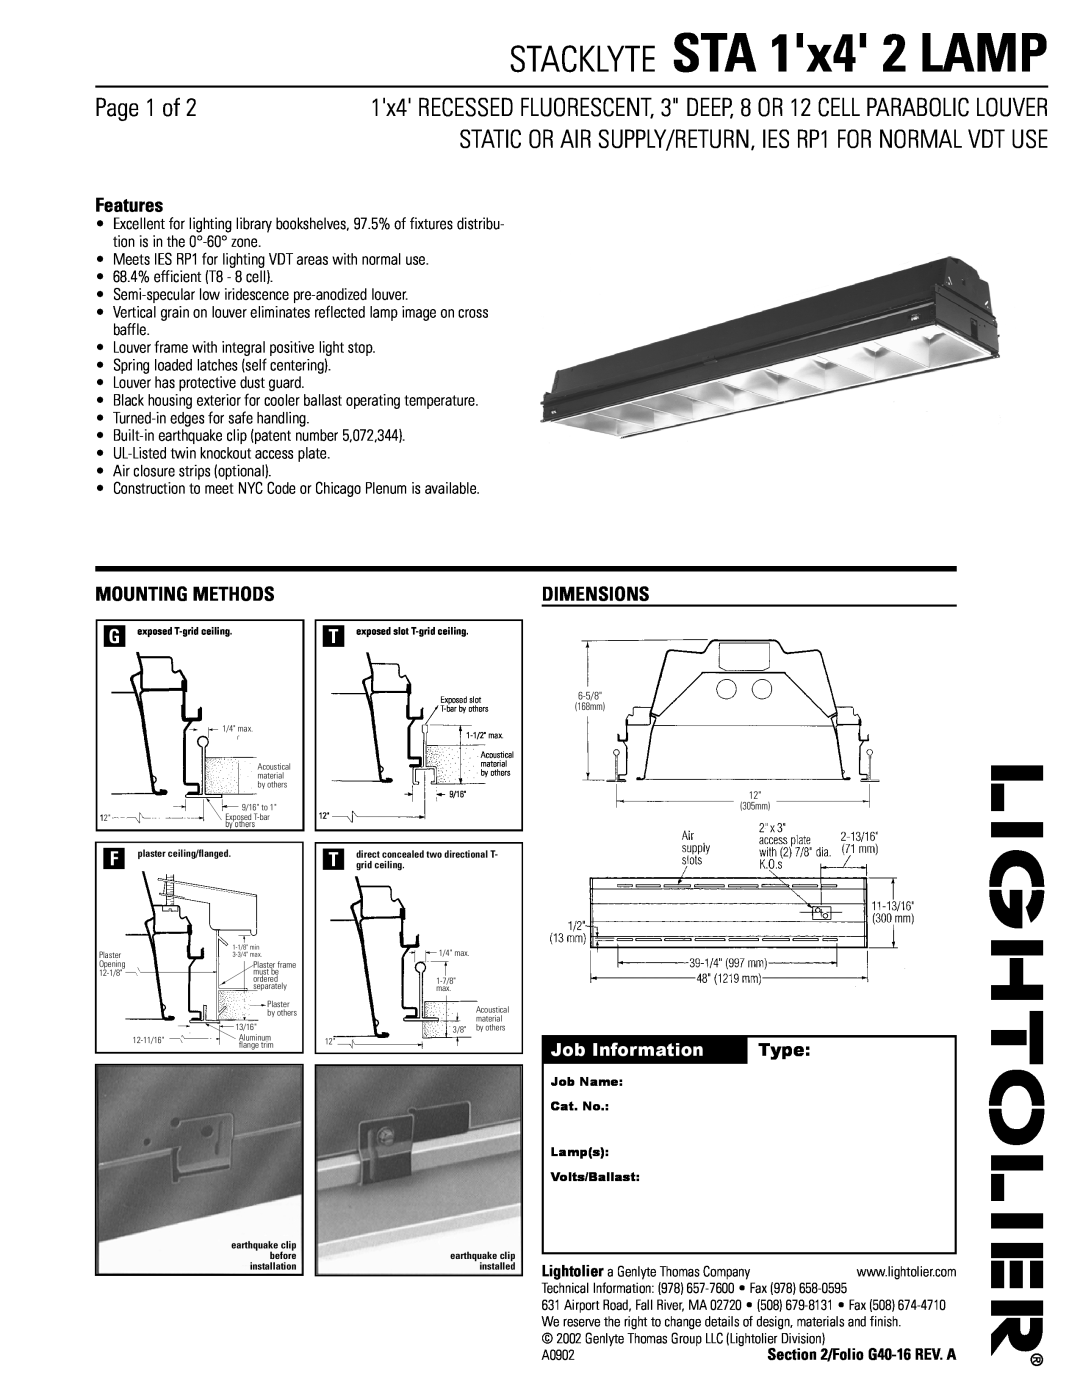 Lightolier Fluorescent Lighting dimensions STACKLYTE STA 1x4 2 LAMP, Page 1 of, Features, Mounting Methods, Dimensions 